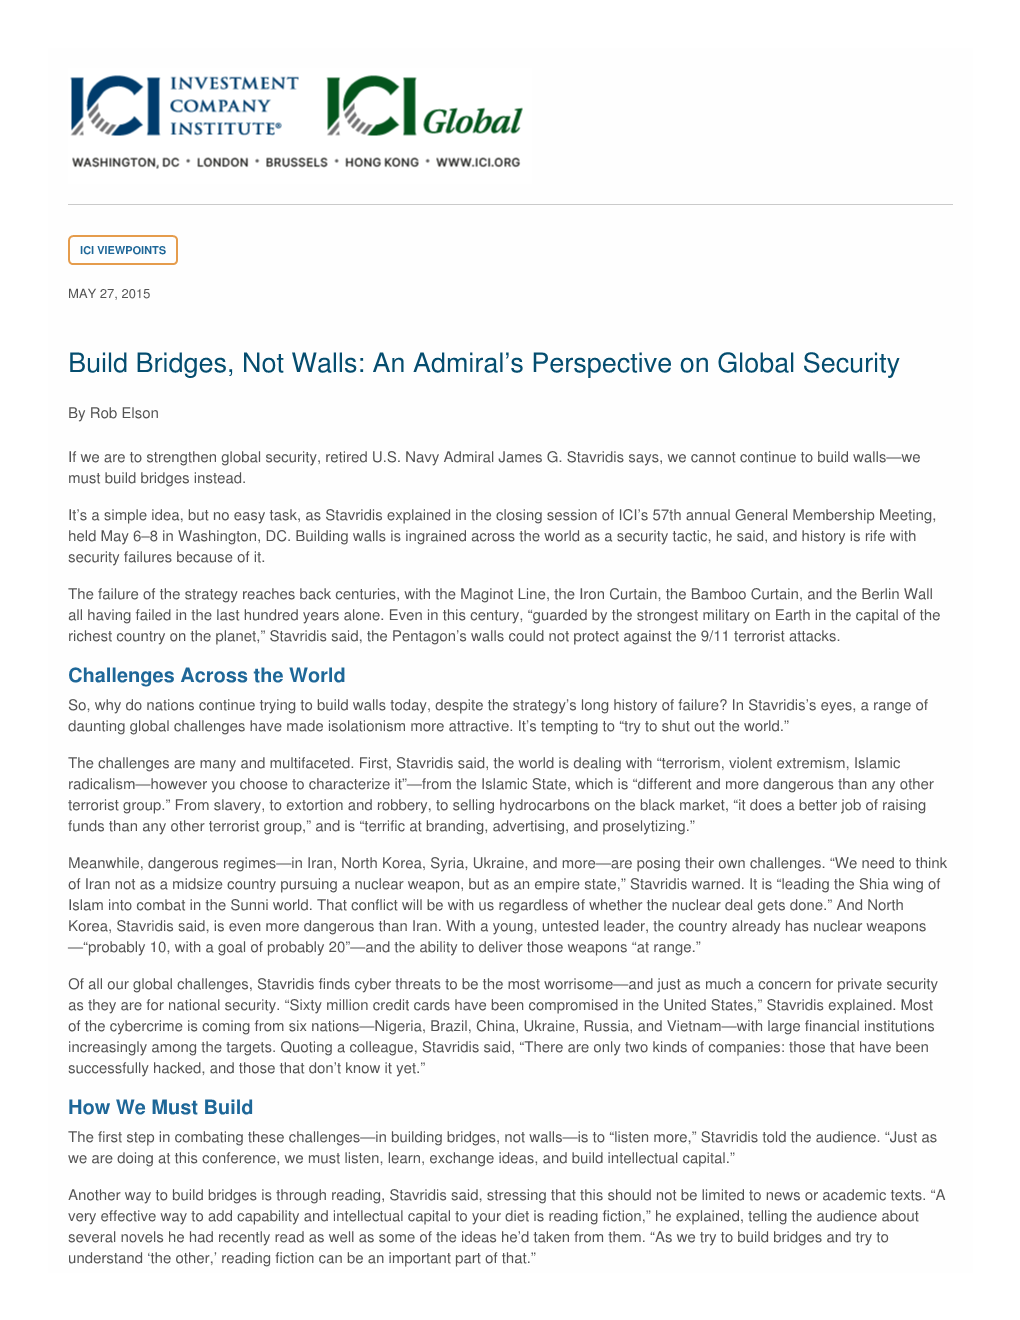 Build Bridges, Not Walls: an Admiral’S Perspective on Global Security